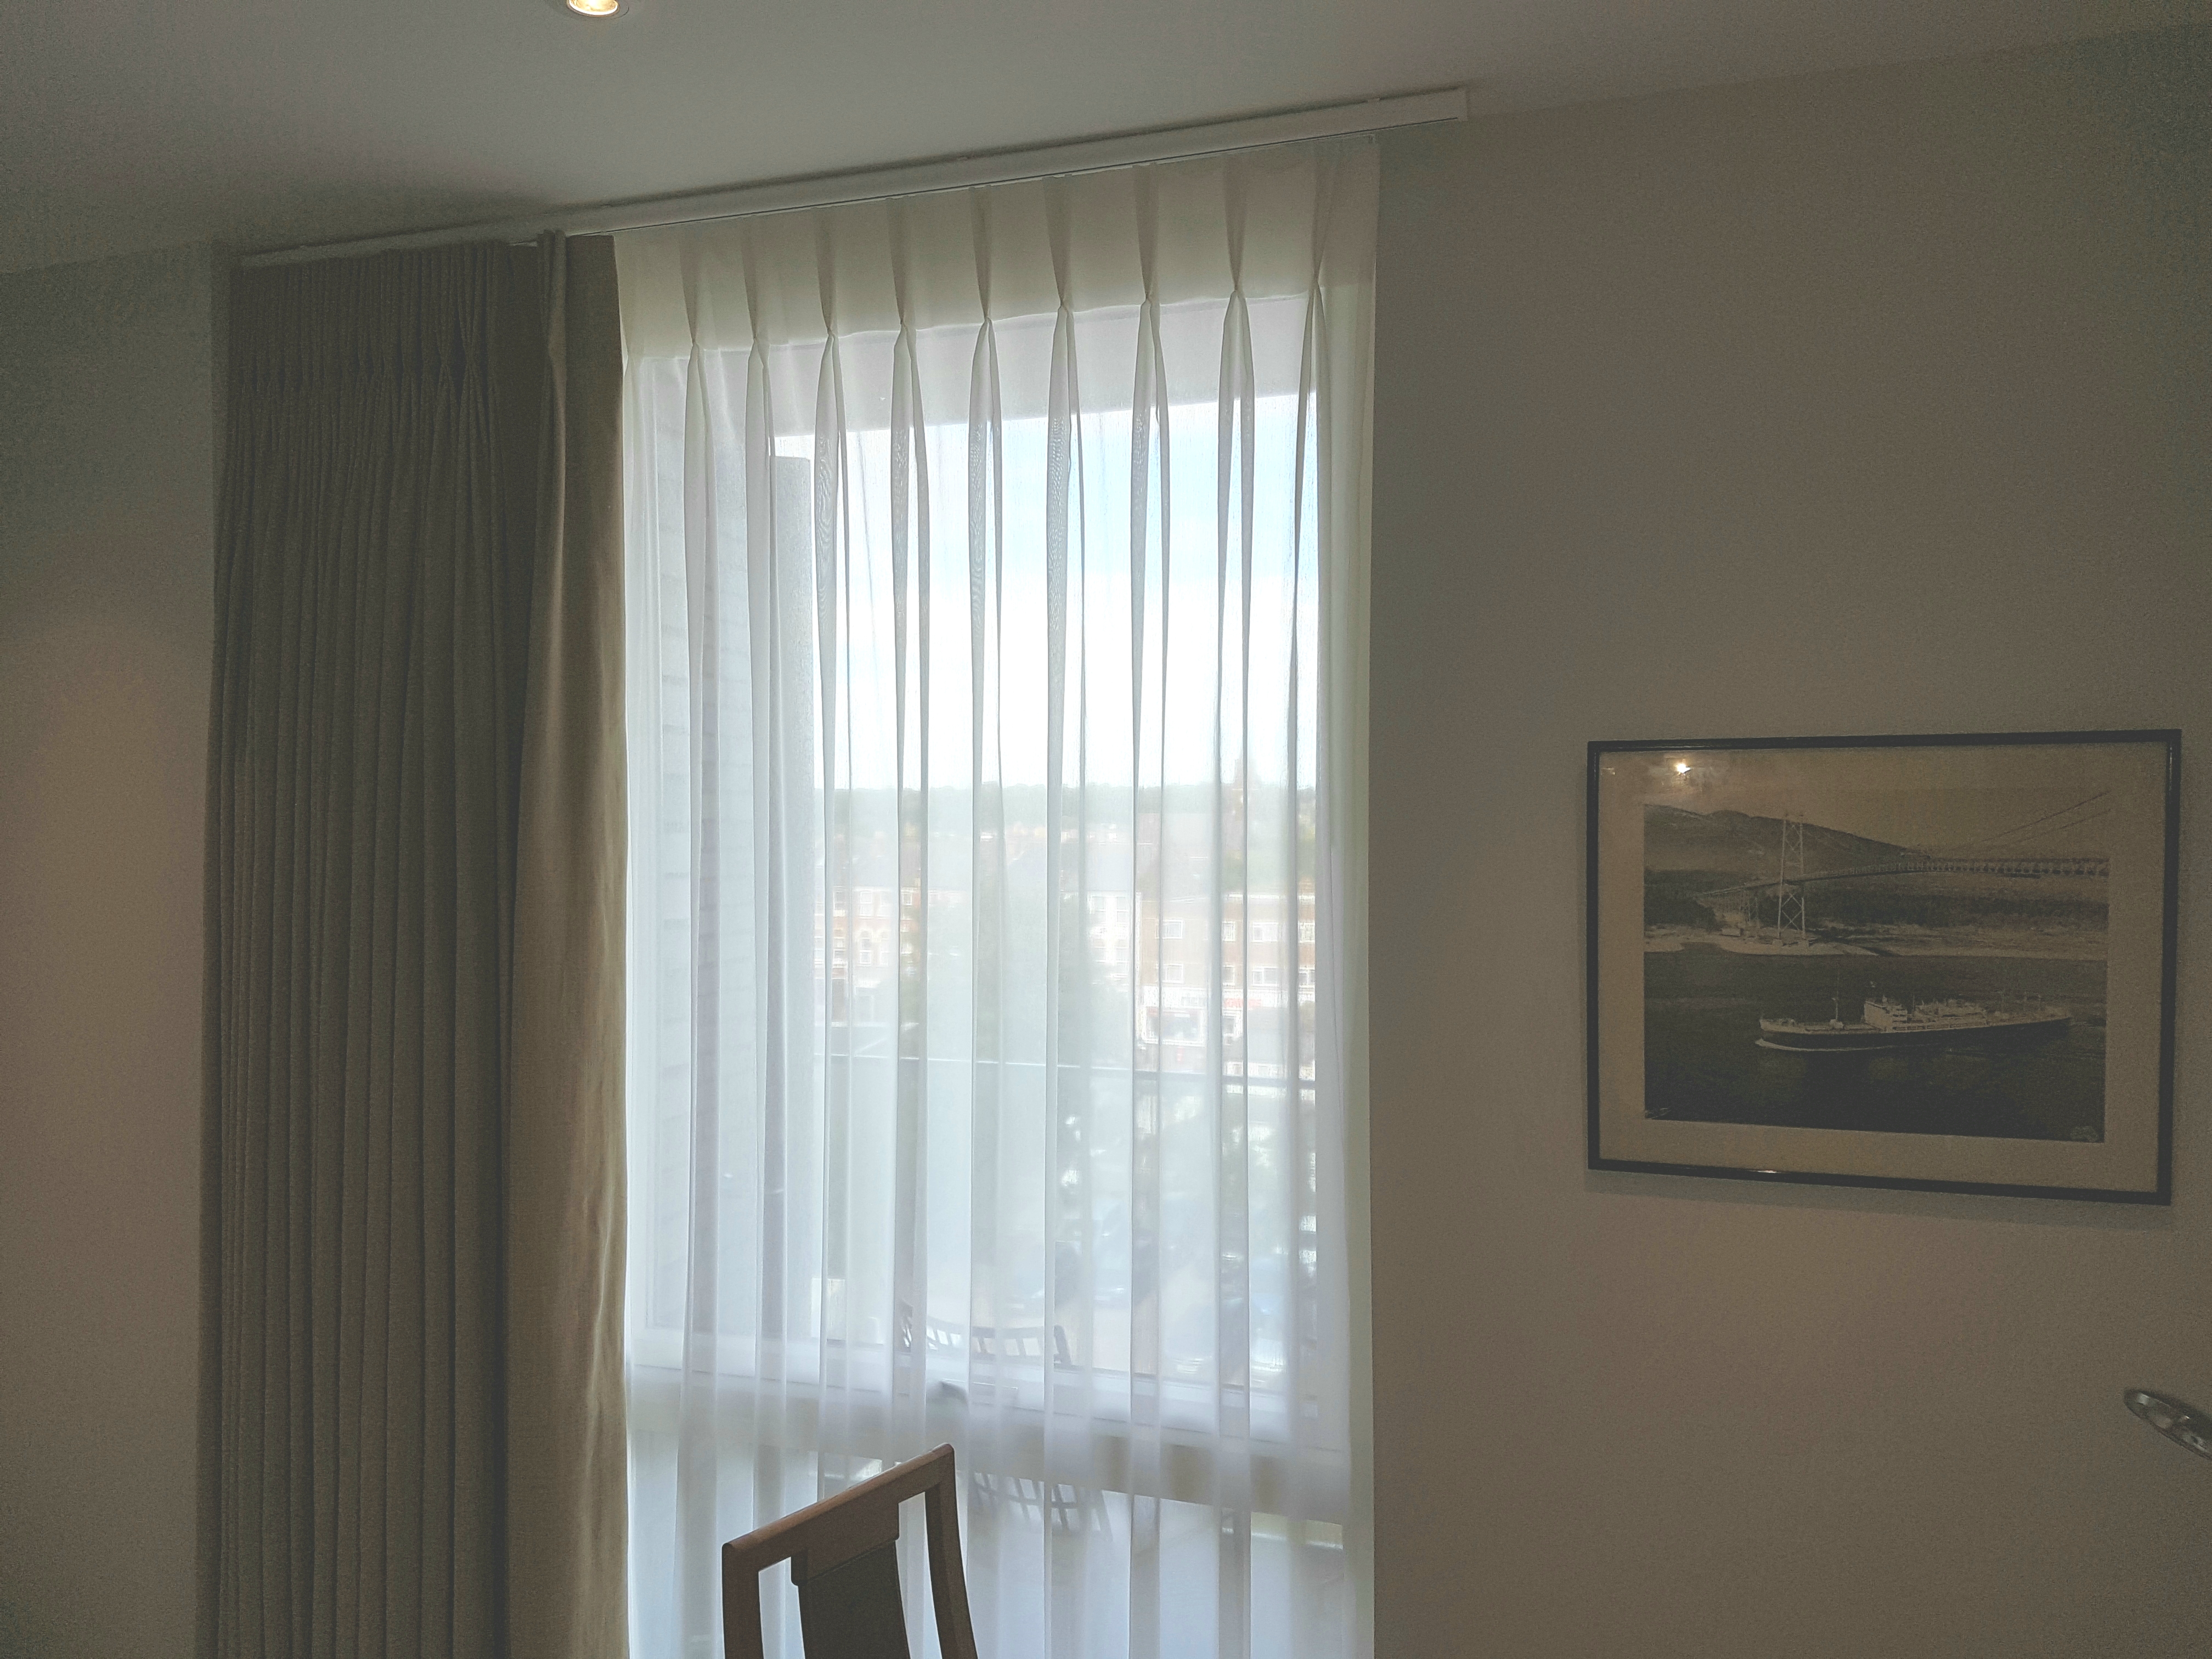 Single double pleat sheer curtain and blackout curtain installed to a curtain track and a pole